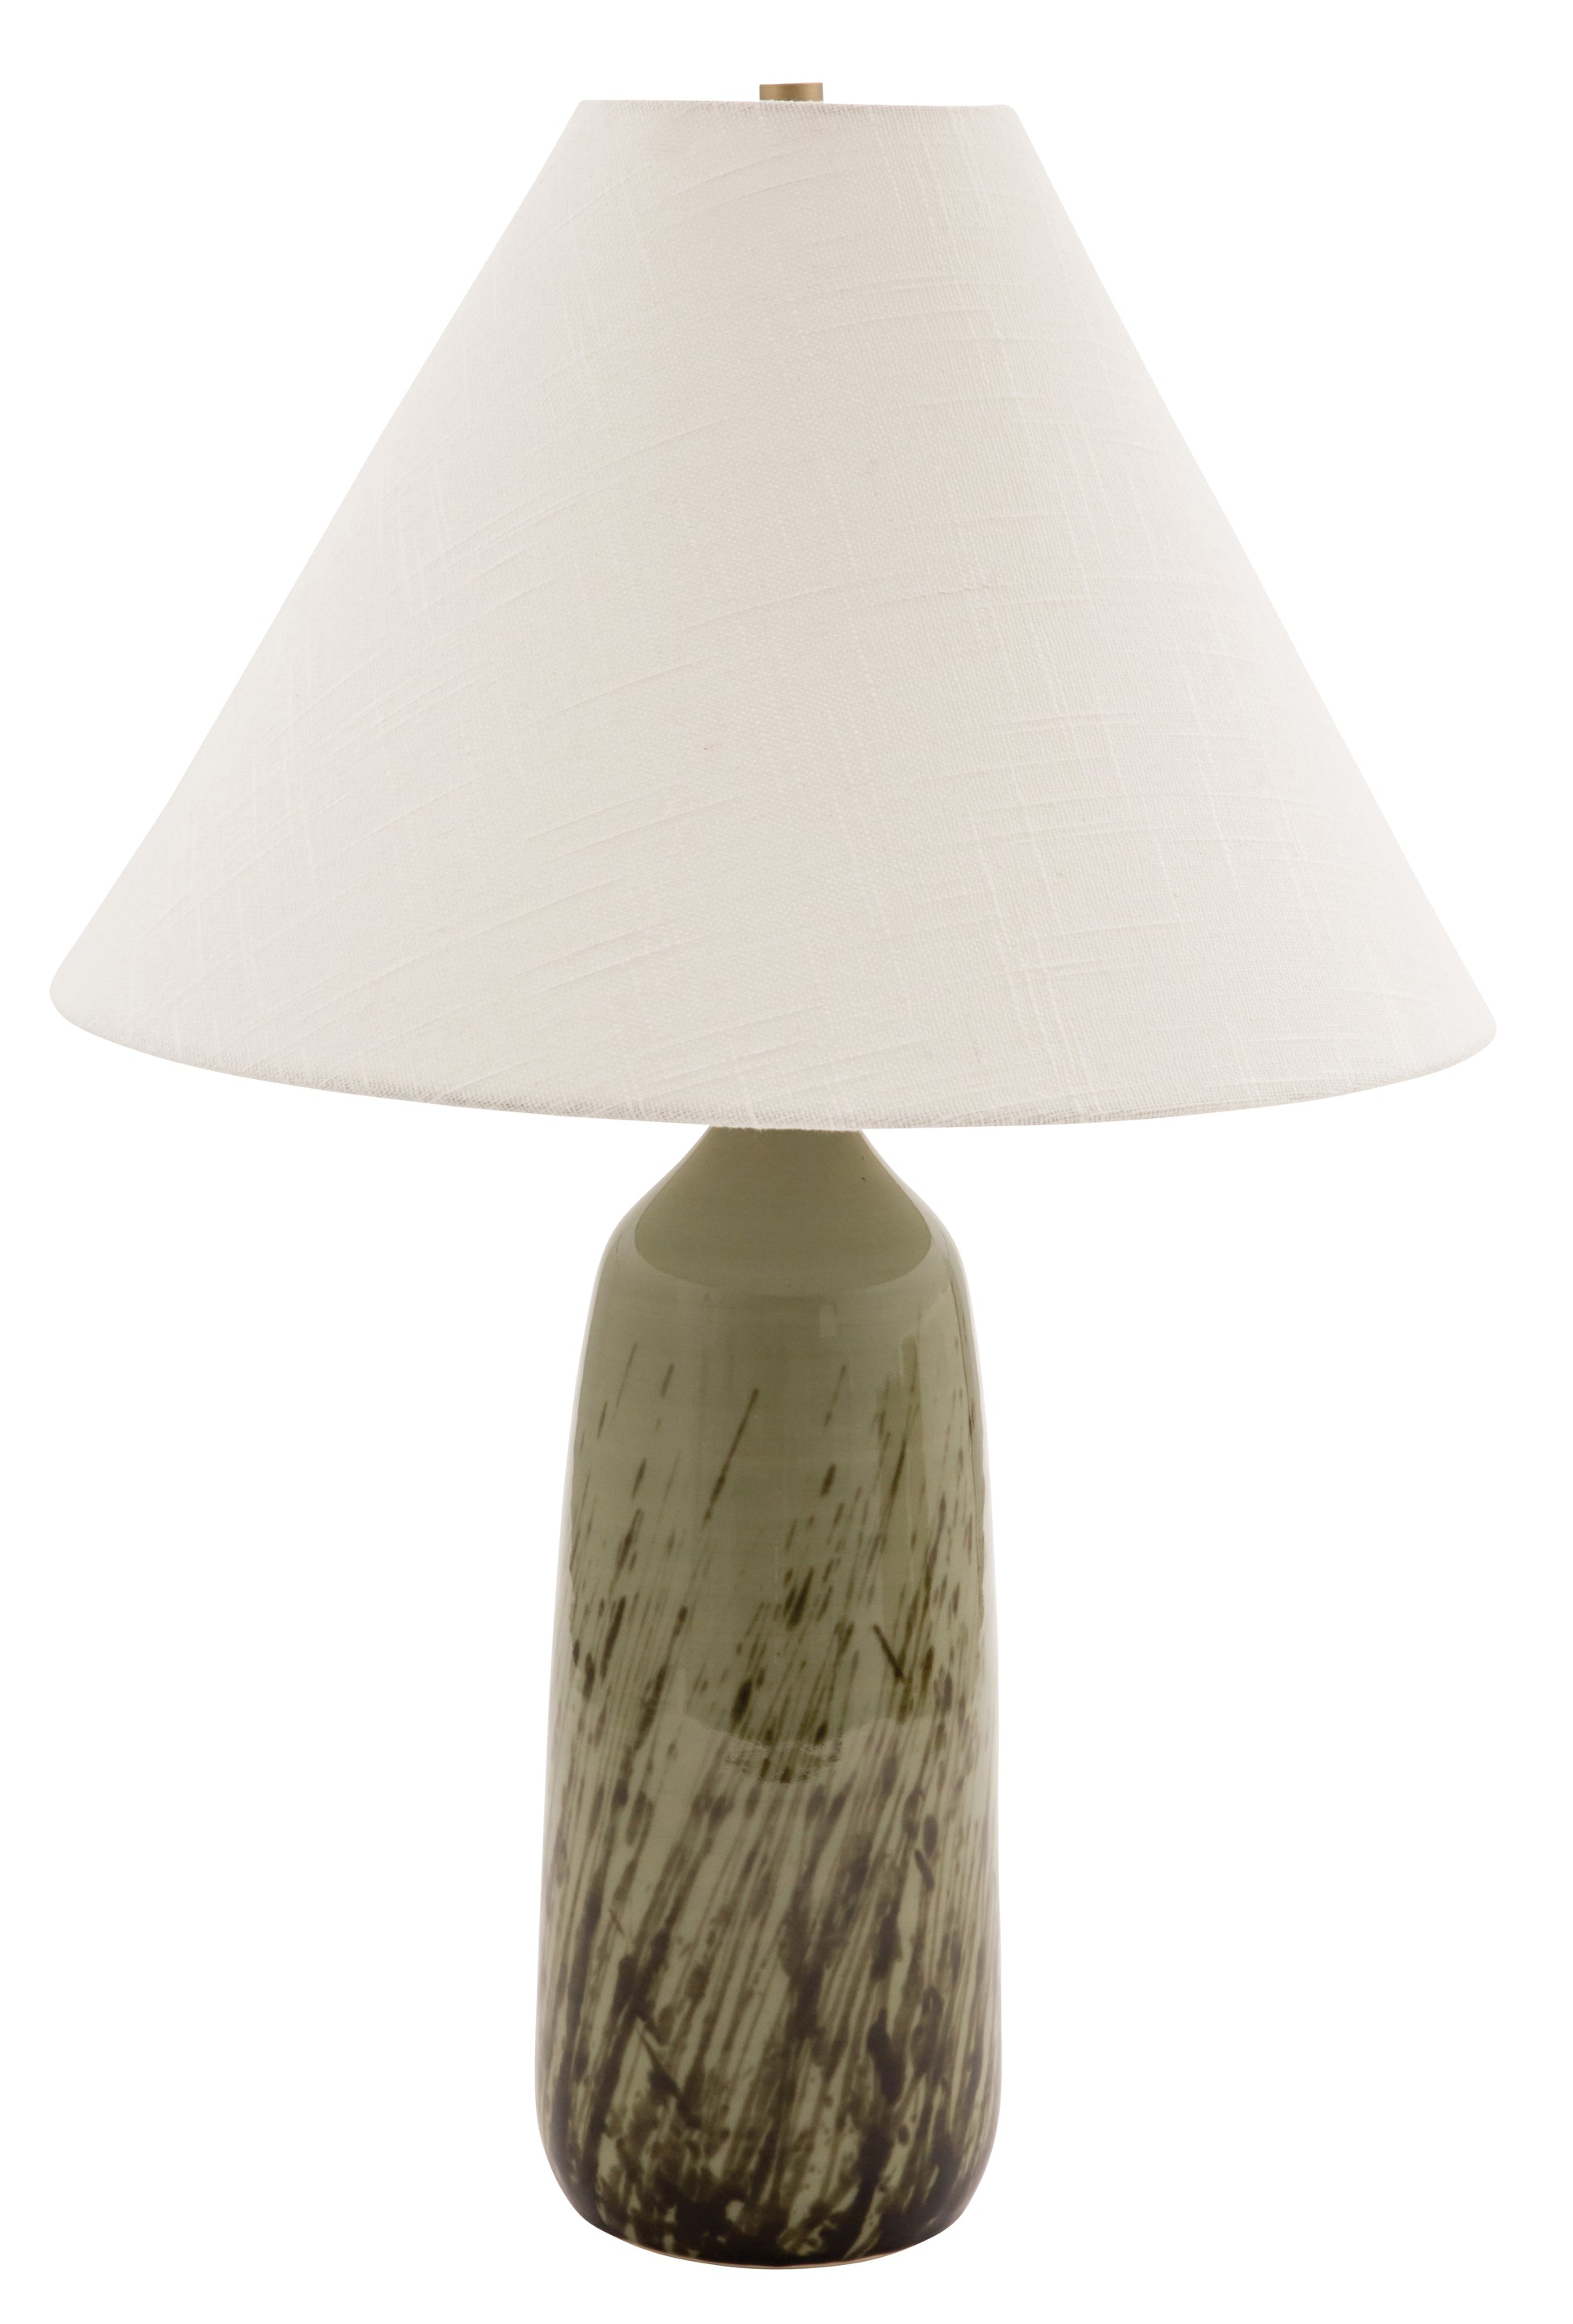 House of Troy Scatchard 25" Stoneware Table Lamp in Decorated Celadon GS100-DCG